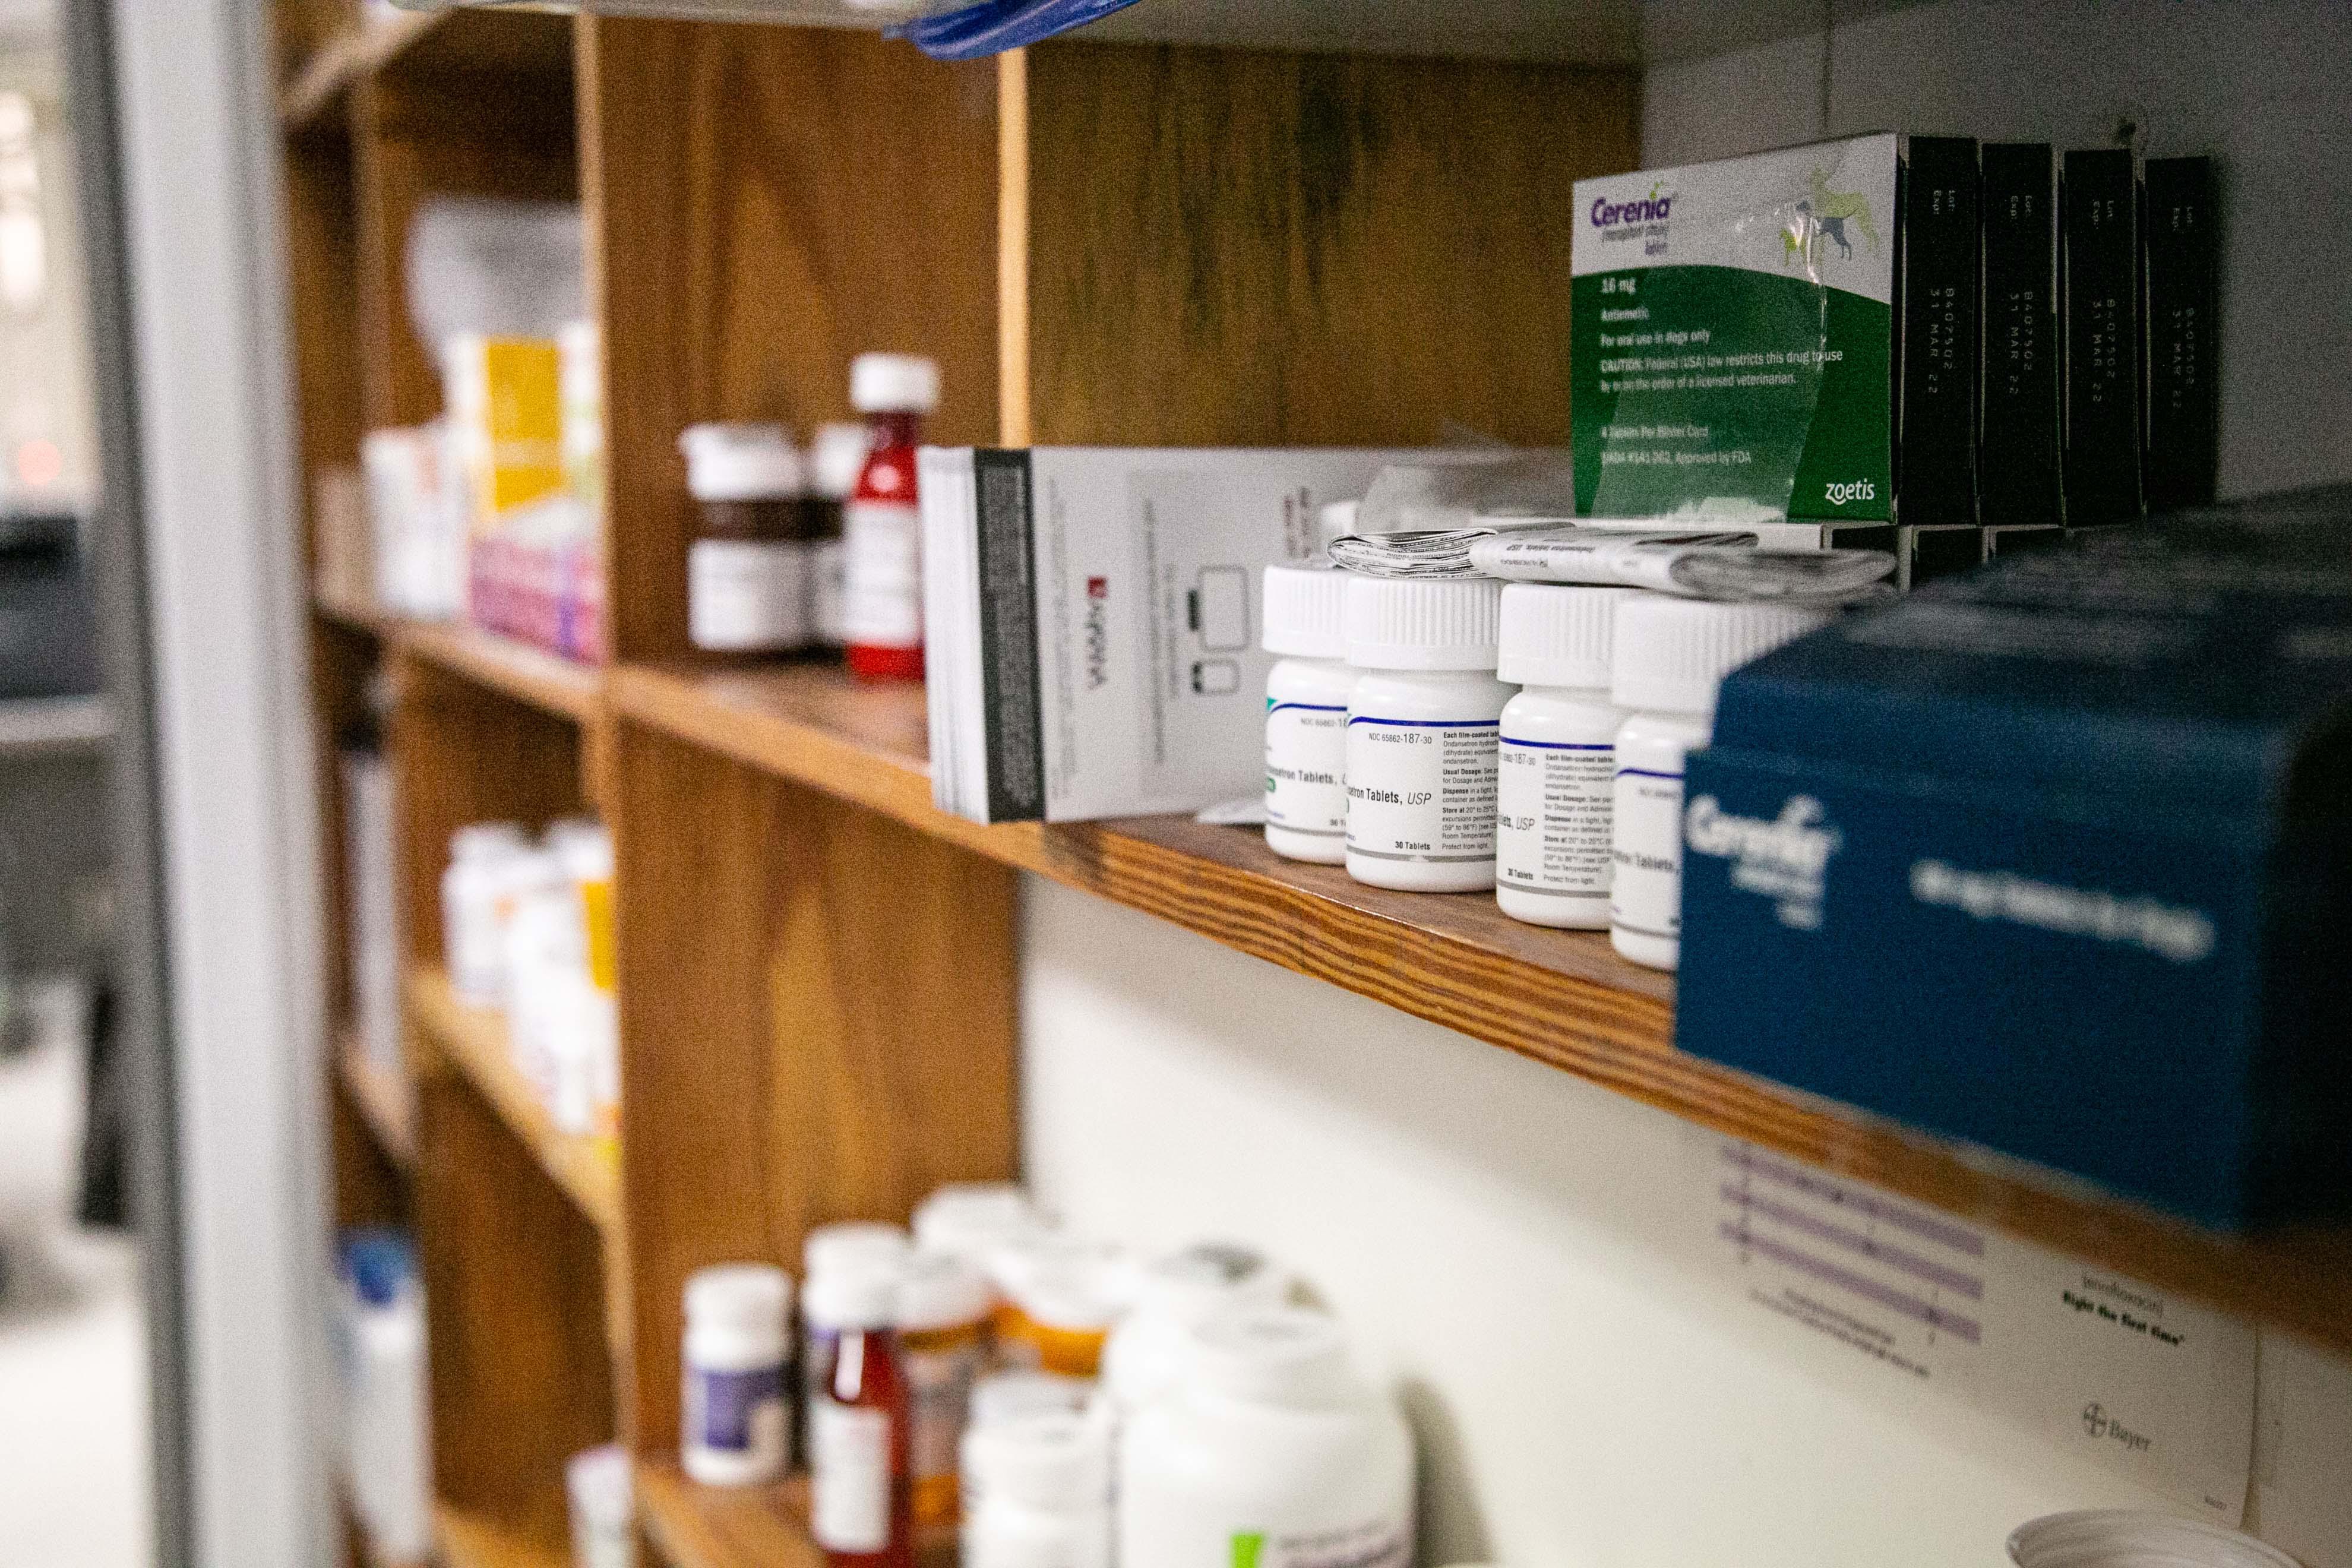 Our hospital also houses an on-site pharmacy to give our clients convenient and direct access to a wide range of medications their pets may need.